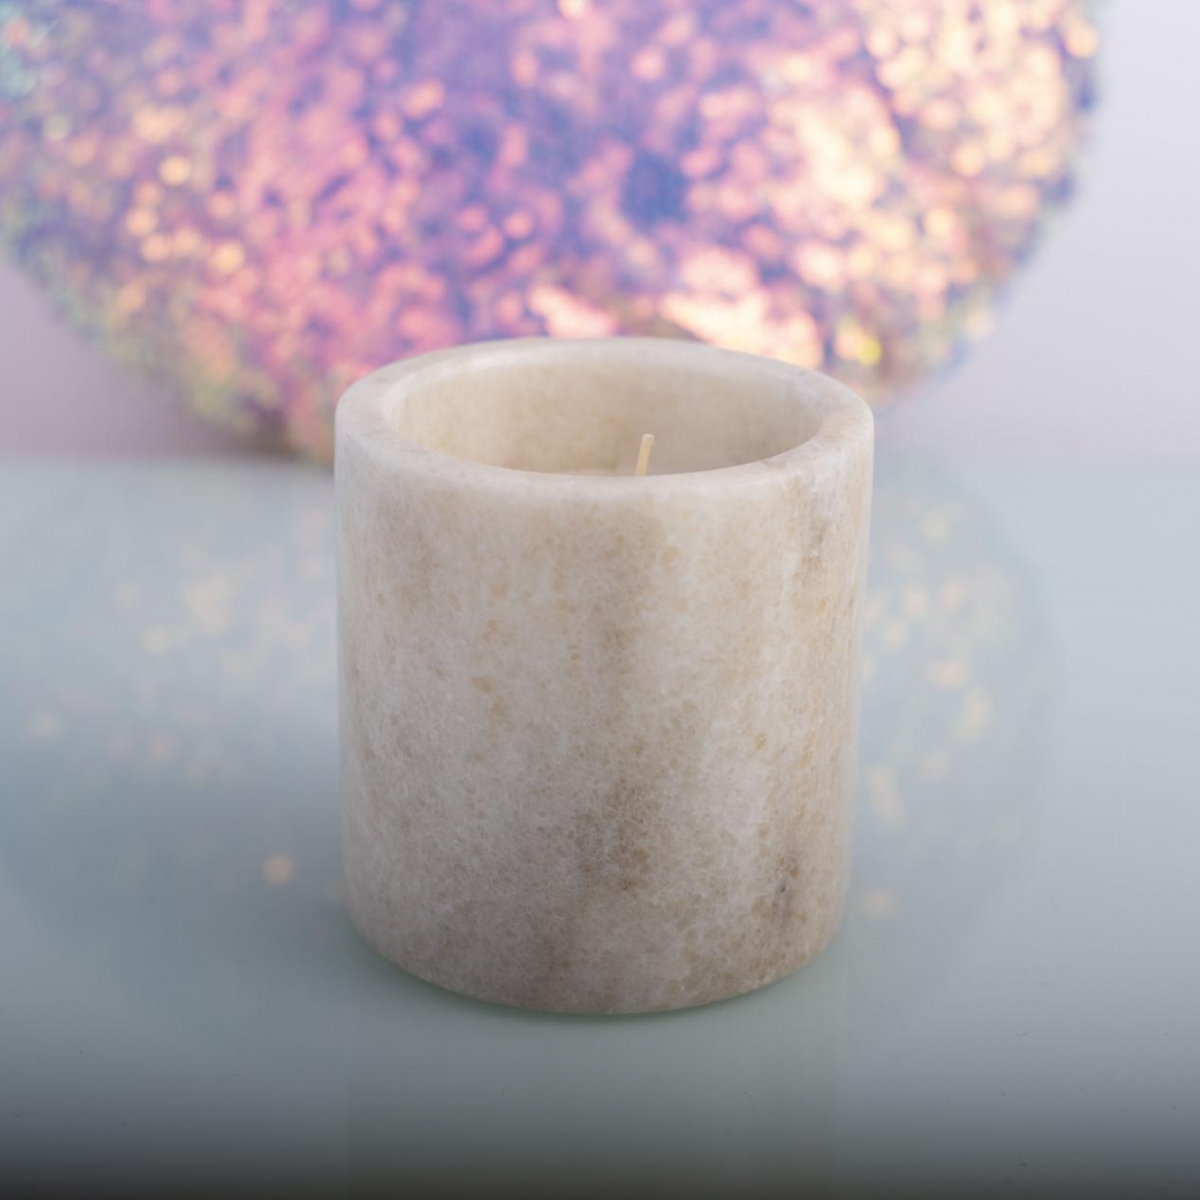 Marble Candles : Luxury Candles, Soy Wax , Essential Oils , China Factory , Cheap Price-HOWCANDLE-Candles,Scented Candles,Aromatherapy Candles,Soy Candles,Vegan Candles,Jar Candles,Pillar Candles,Candle Gift Sets,Essential Oils,Reed Diffuser,Candle Holder,